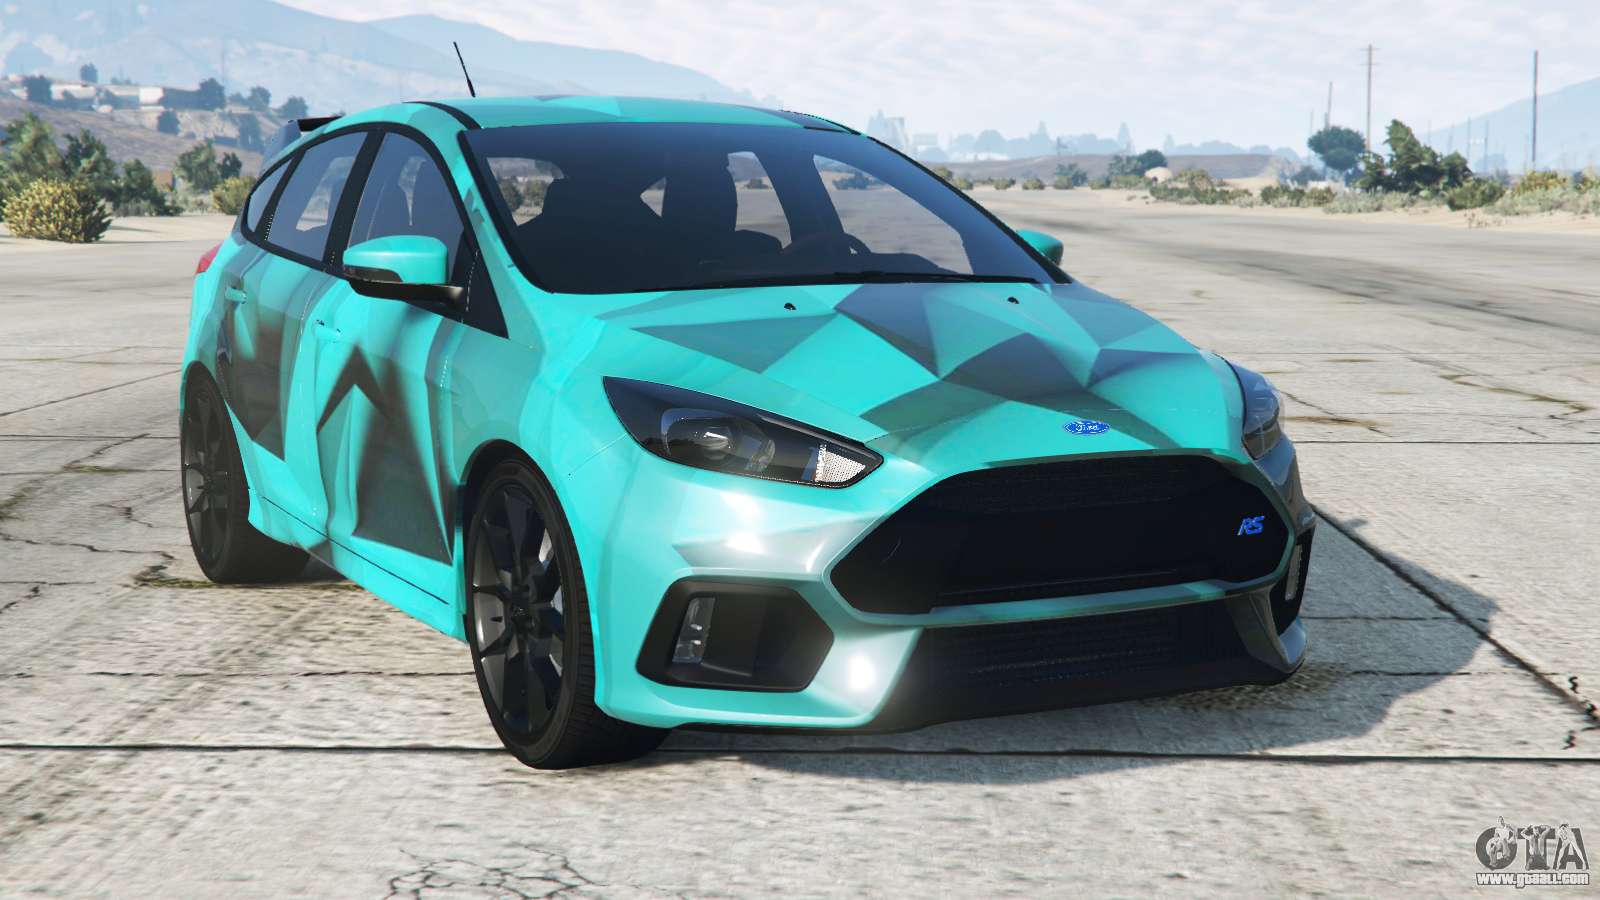 Ford Focus RS Munsell Blue for GTA 5